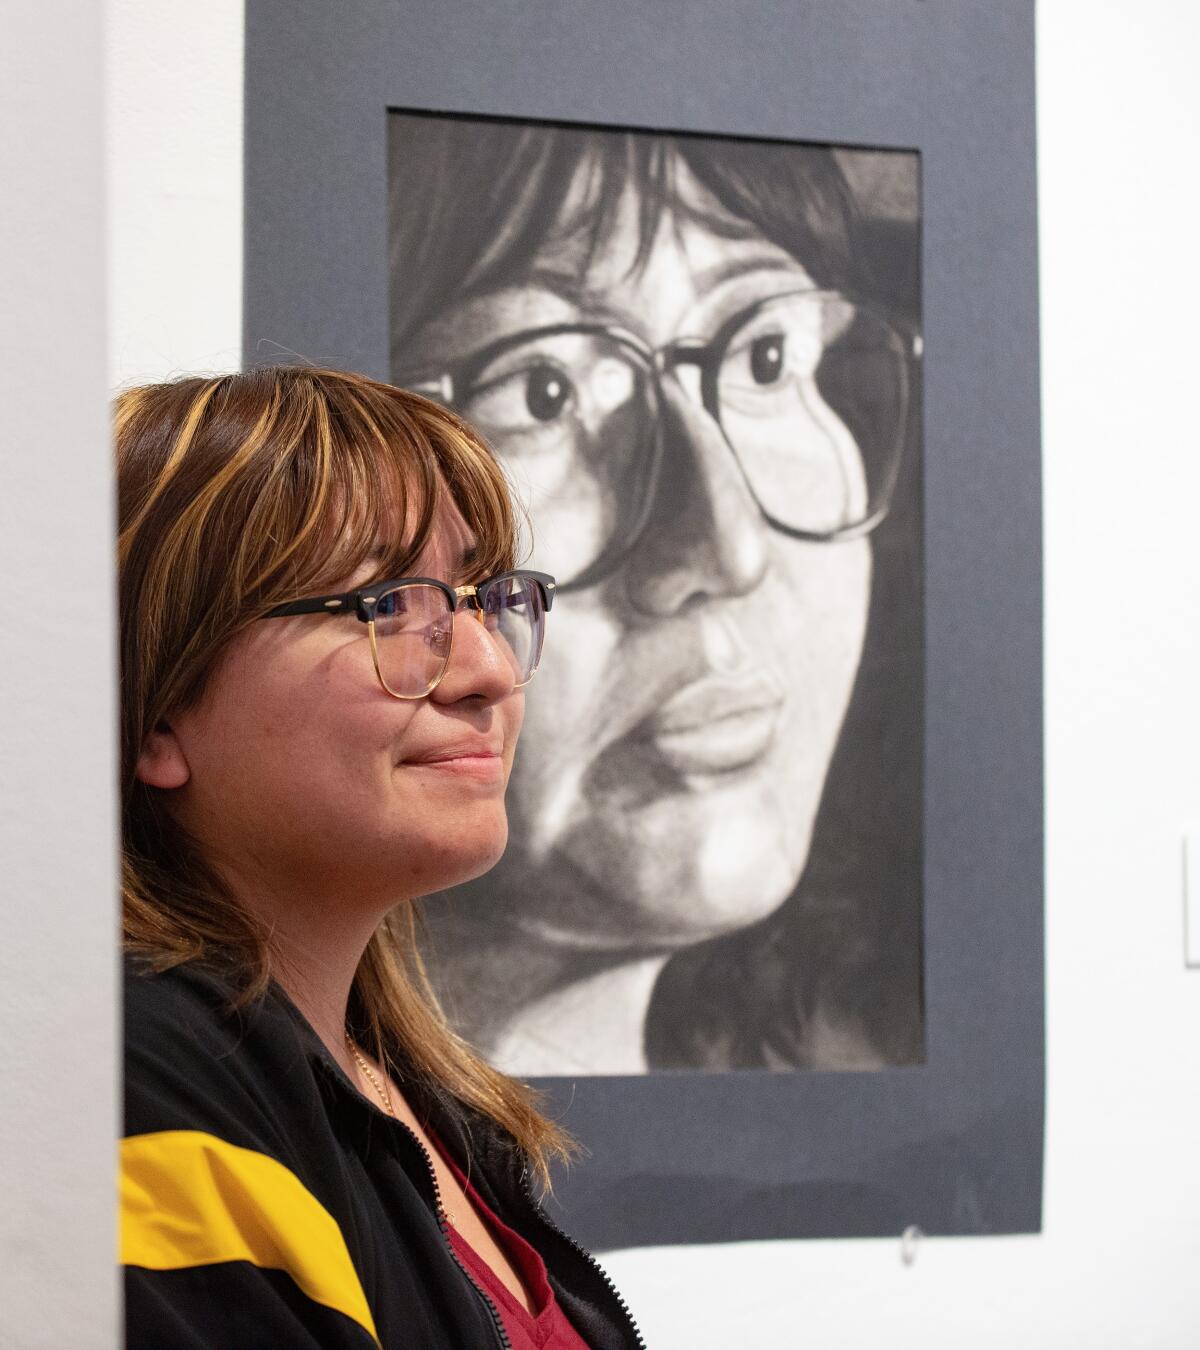 Santiago High junior Kenia Pais poses next to her drawing, "Resolute," at the LCAD Gallery through April 21.